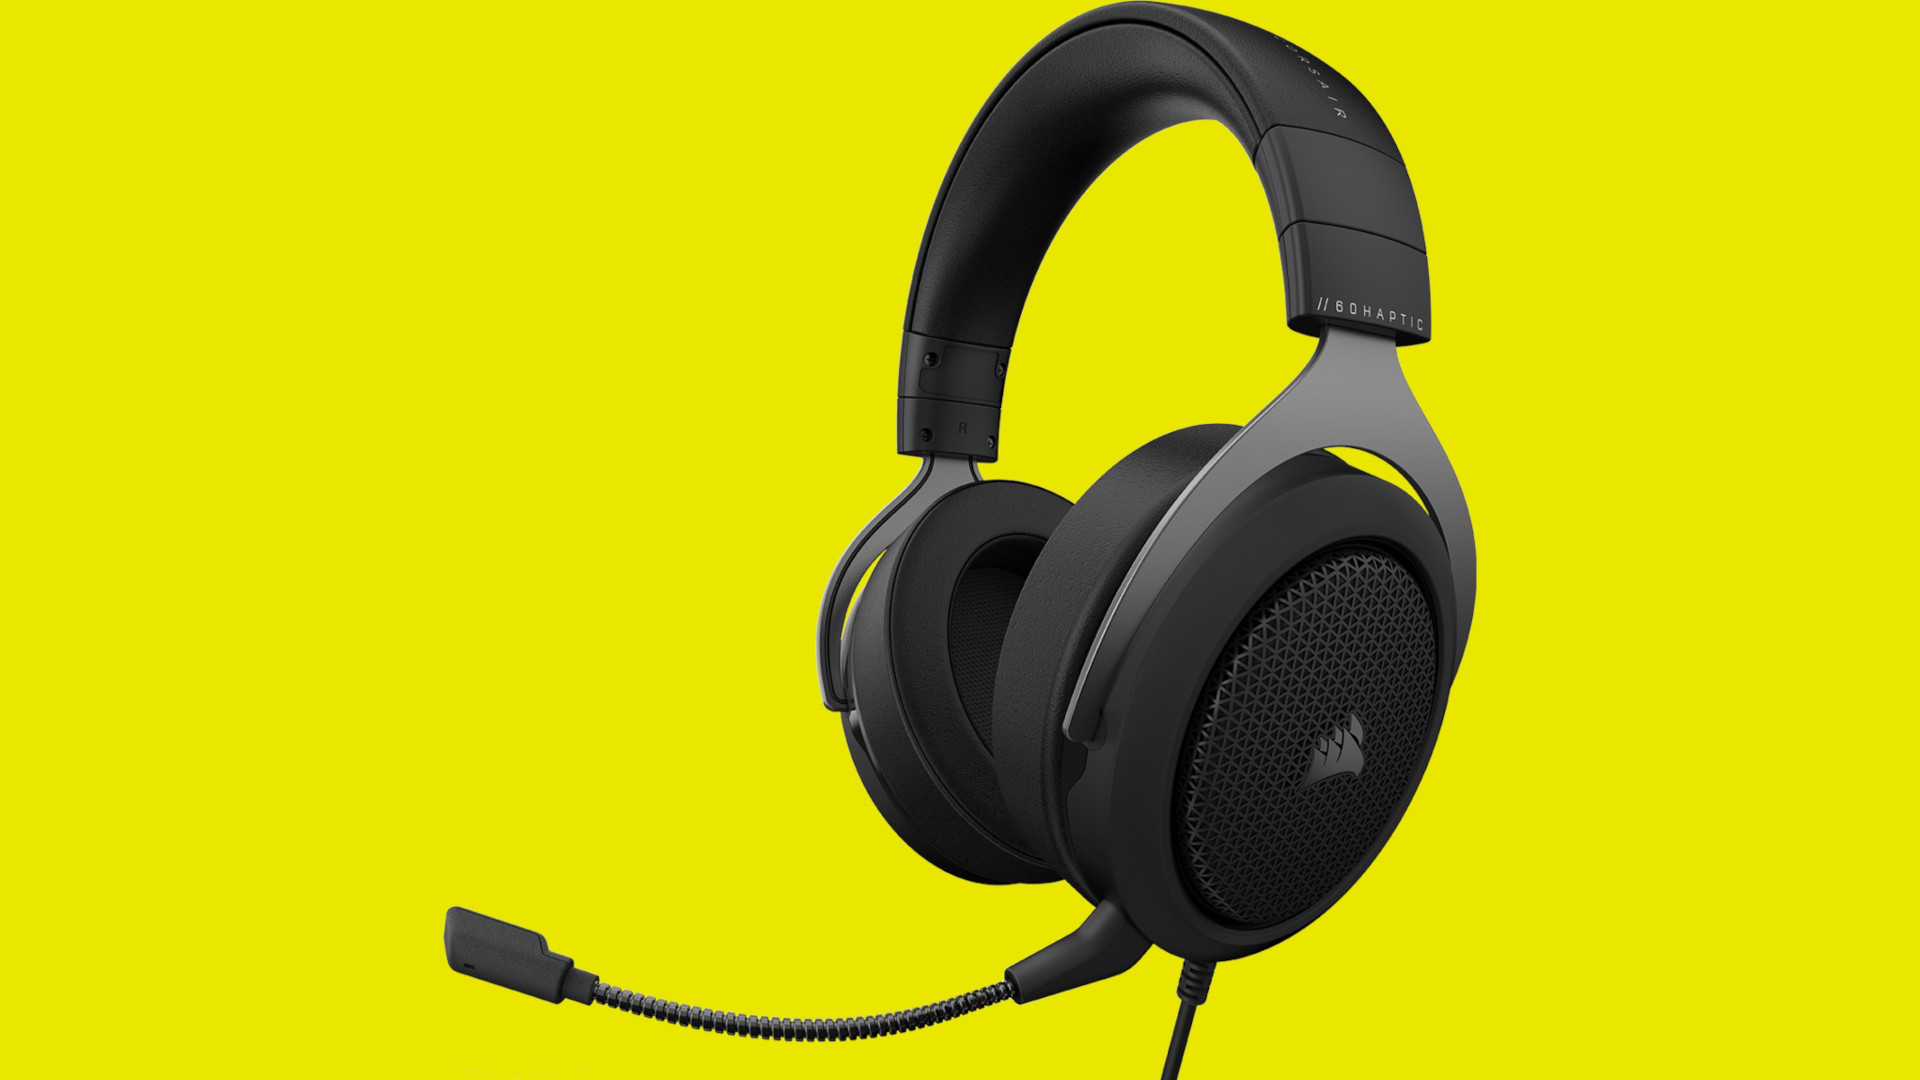 the gaming headset off code Haptic Get HS60 this Corsair 50% with